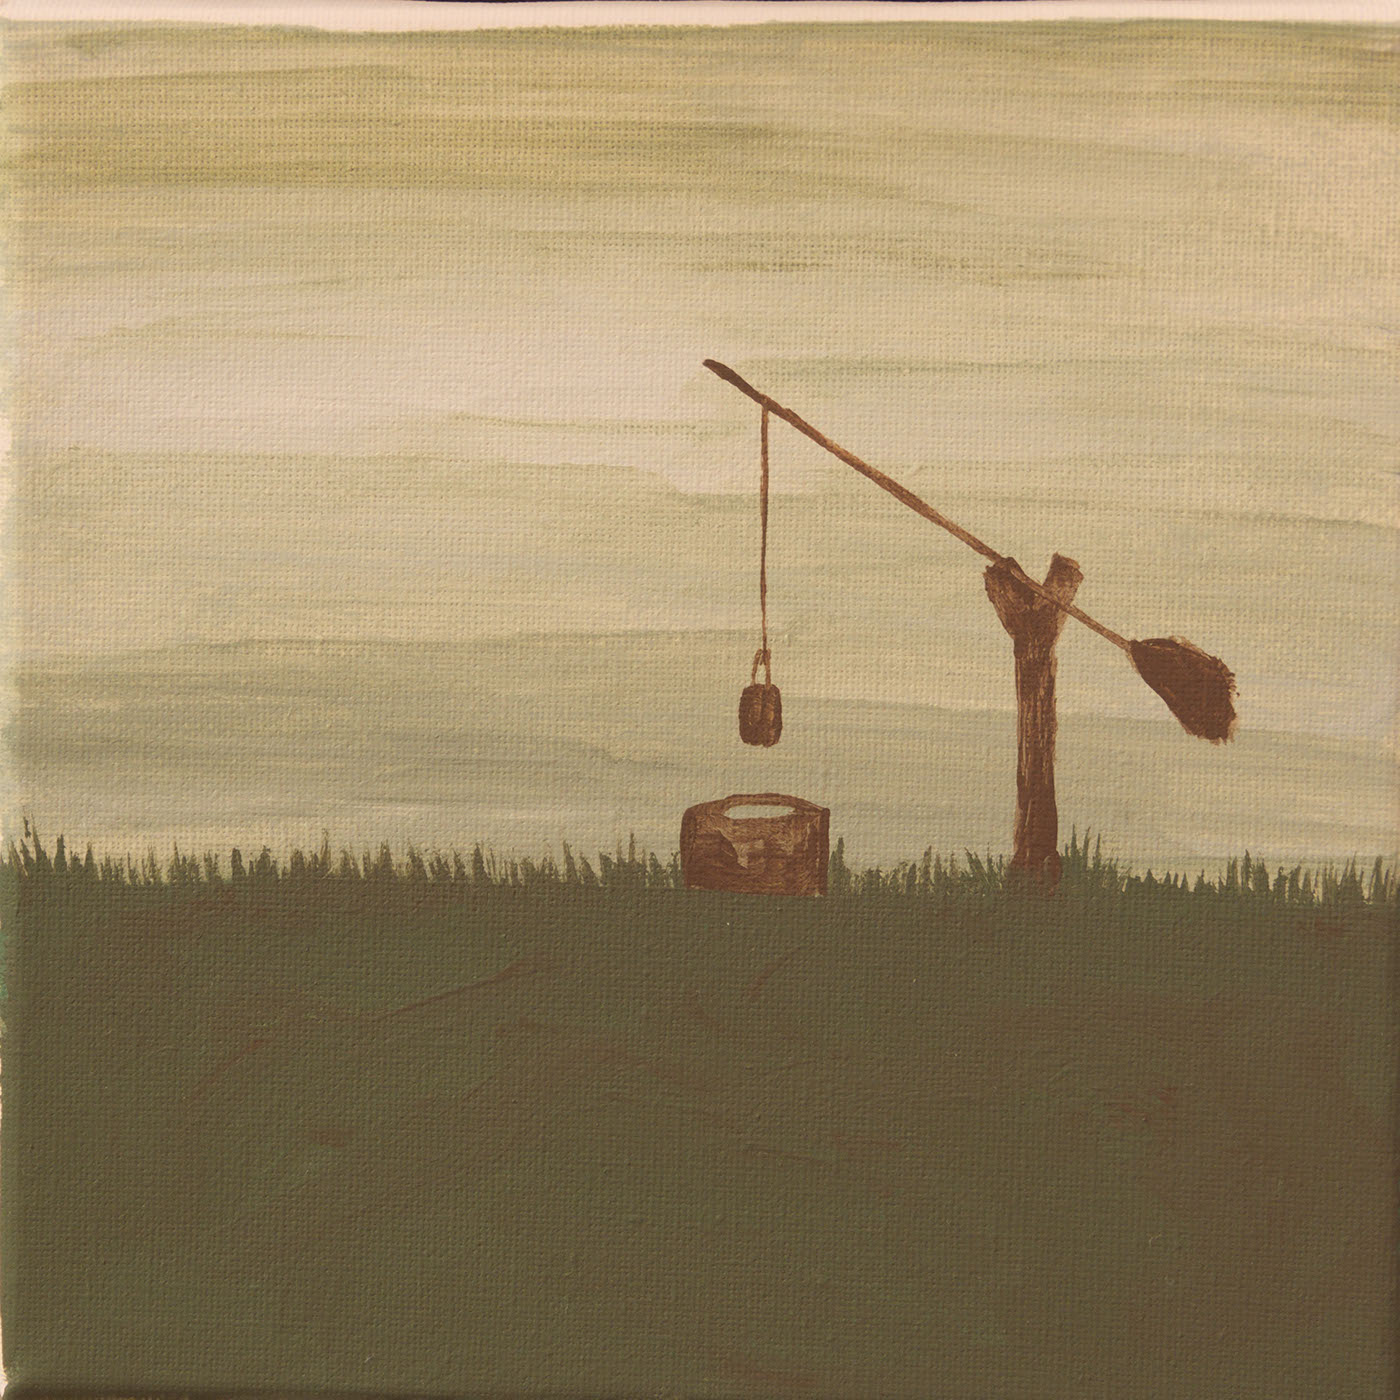 counterweight well grass SKY Landscape rural lonely